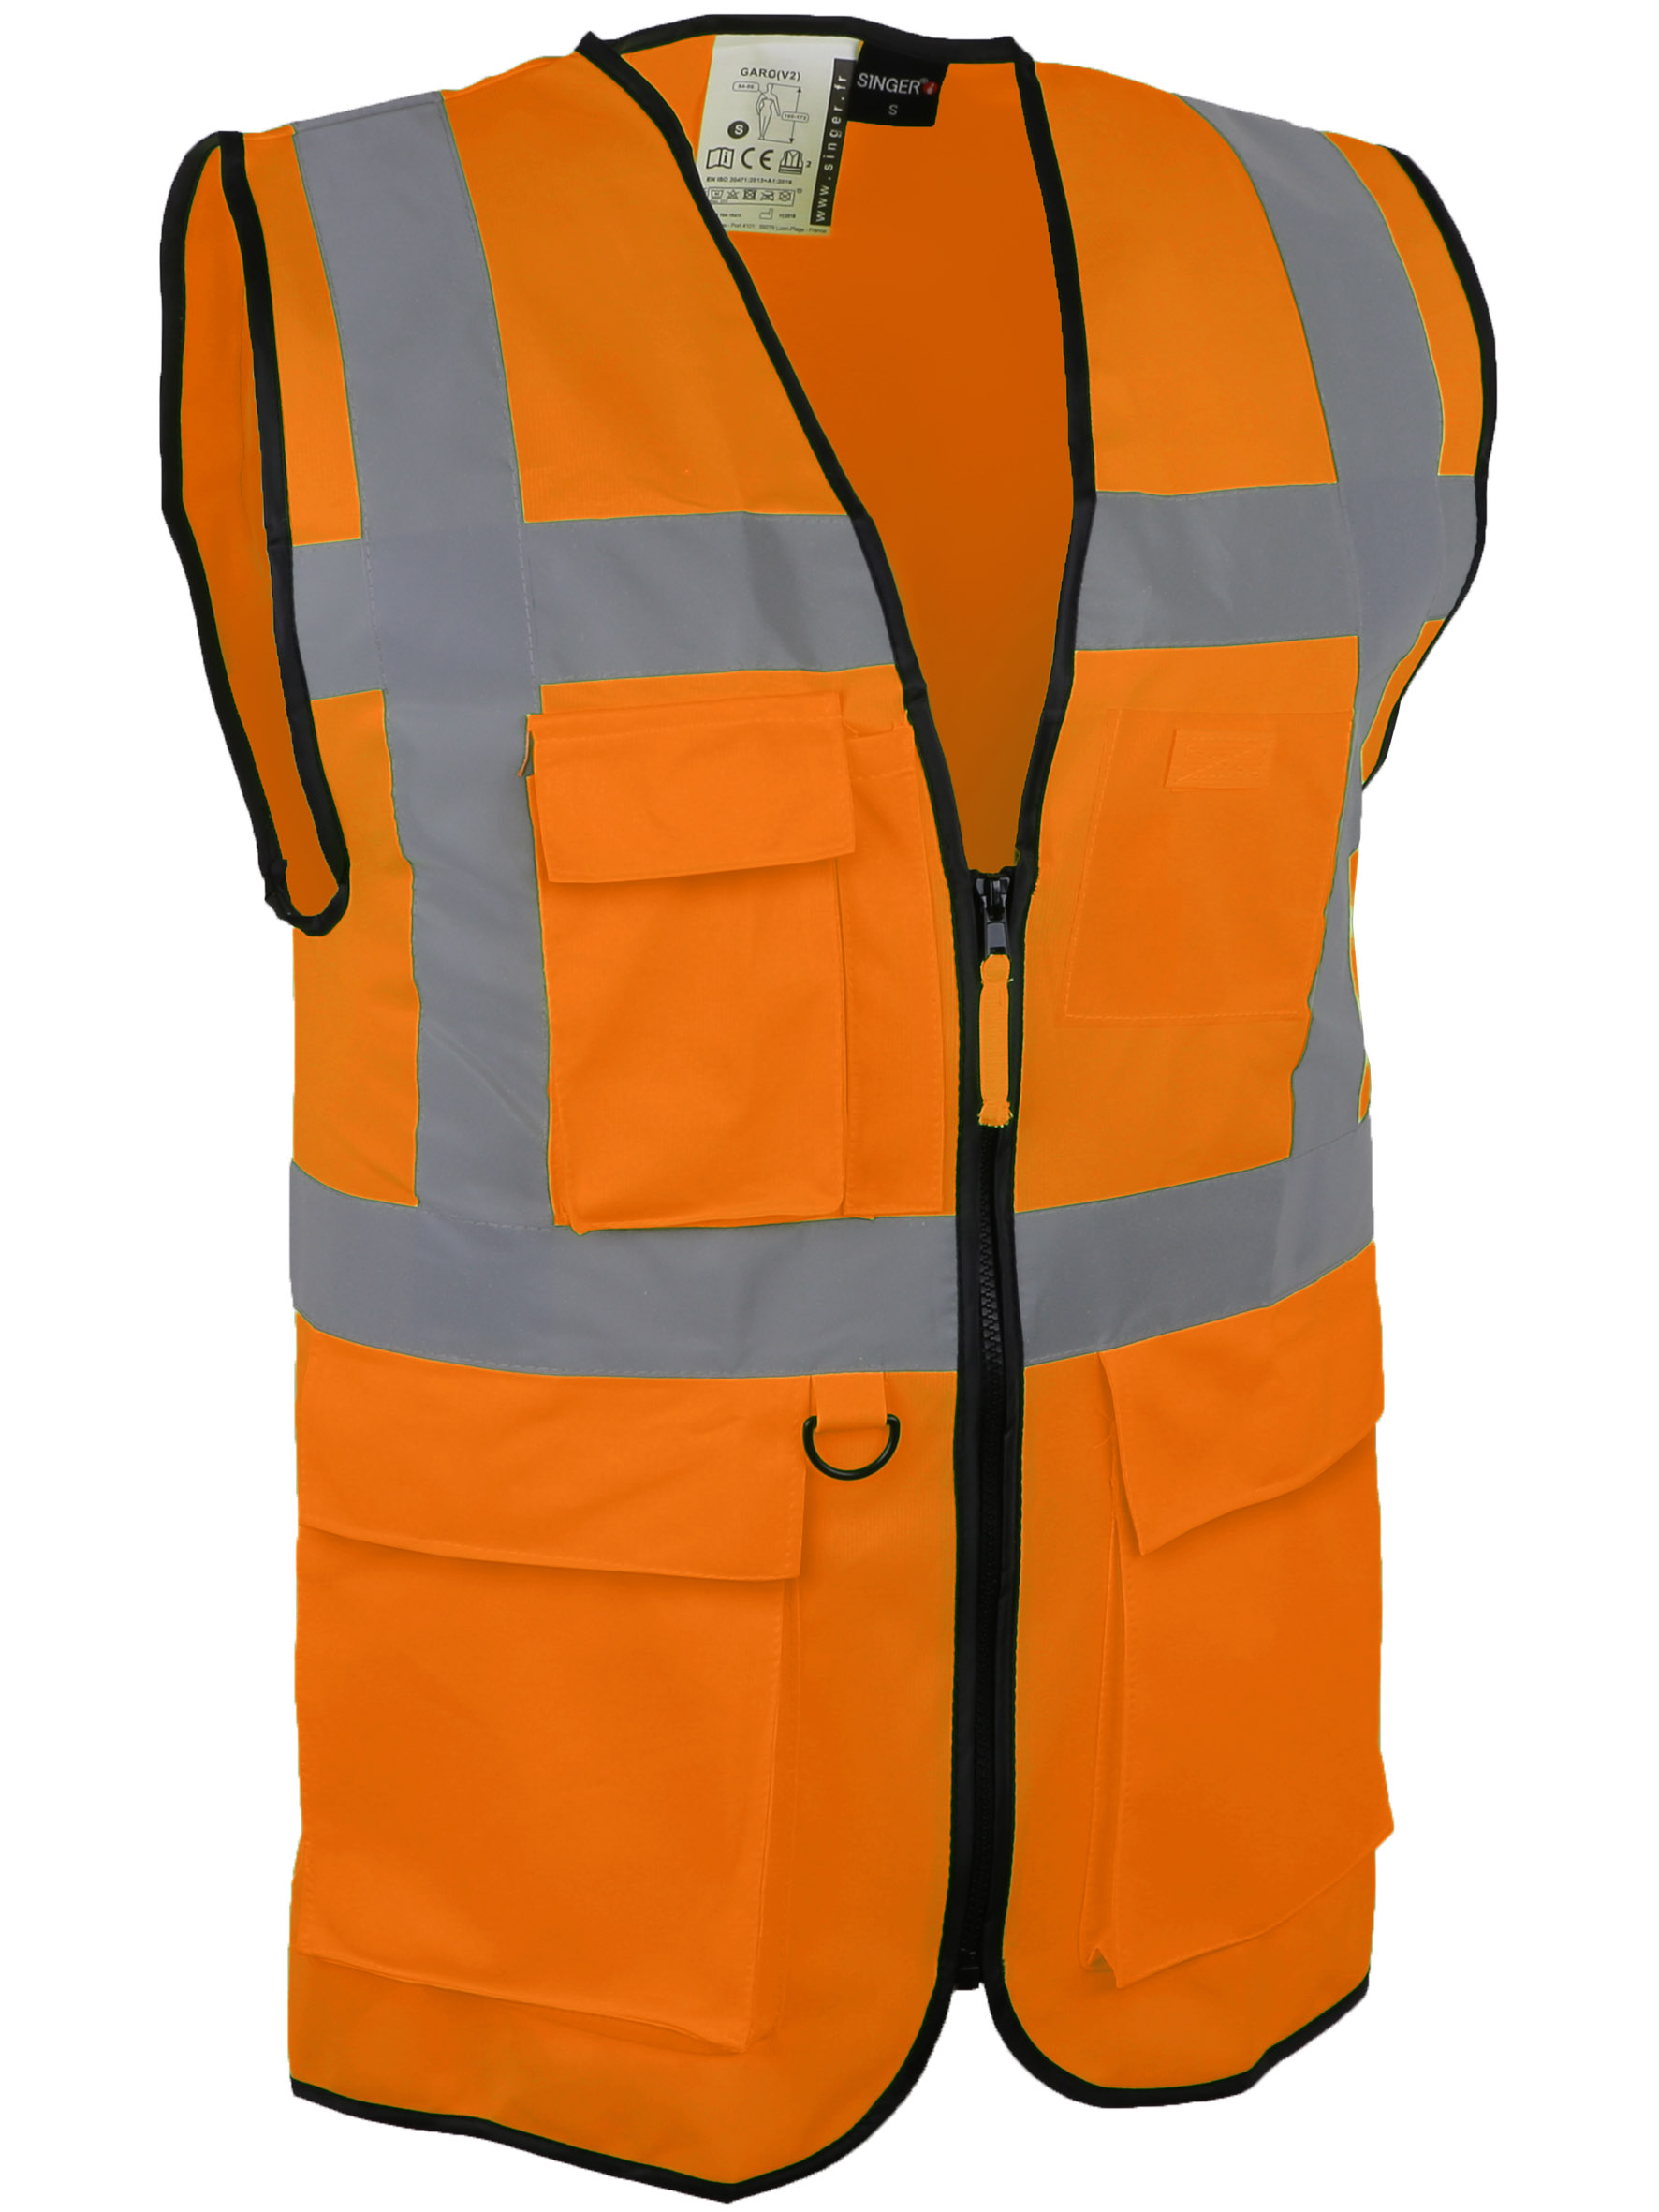 Article - Gilet de signalisation. Polyester. Multi-poches.